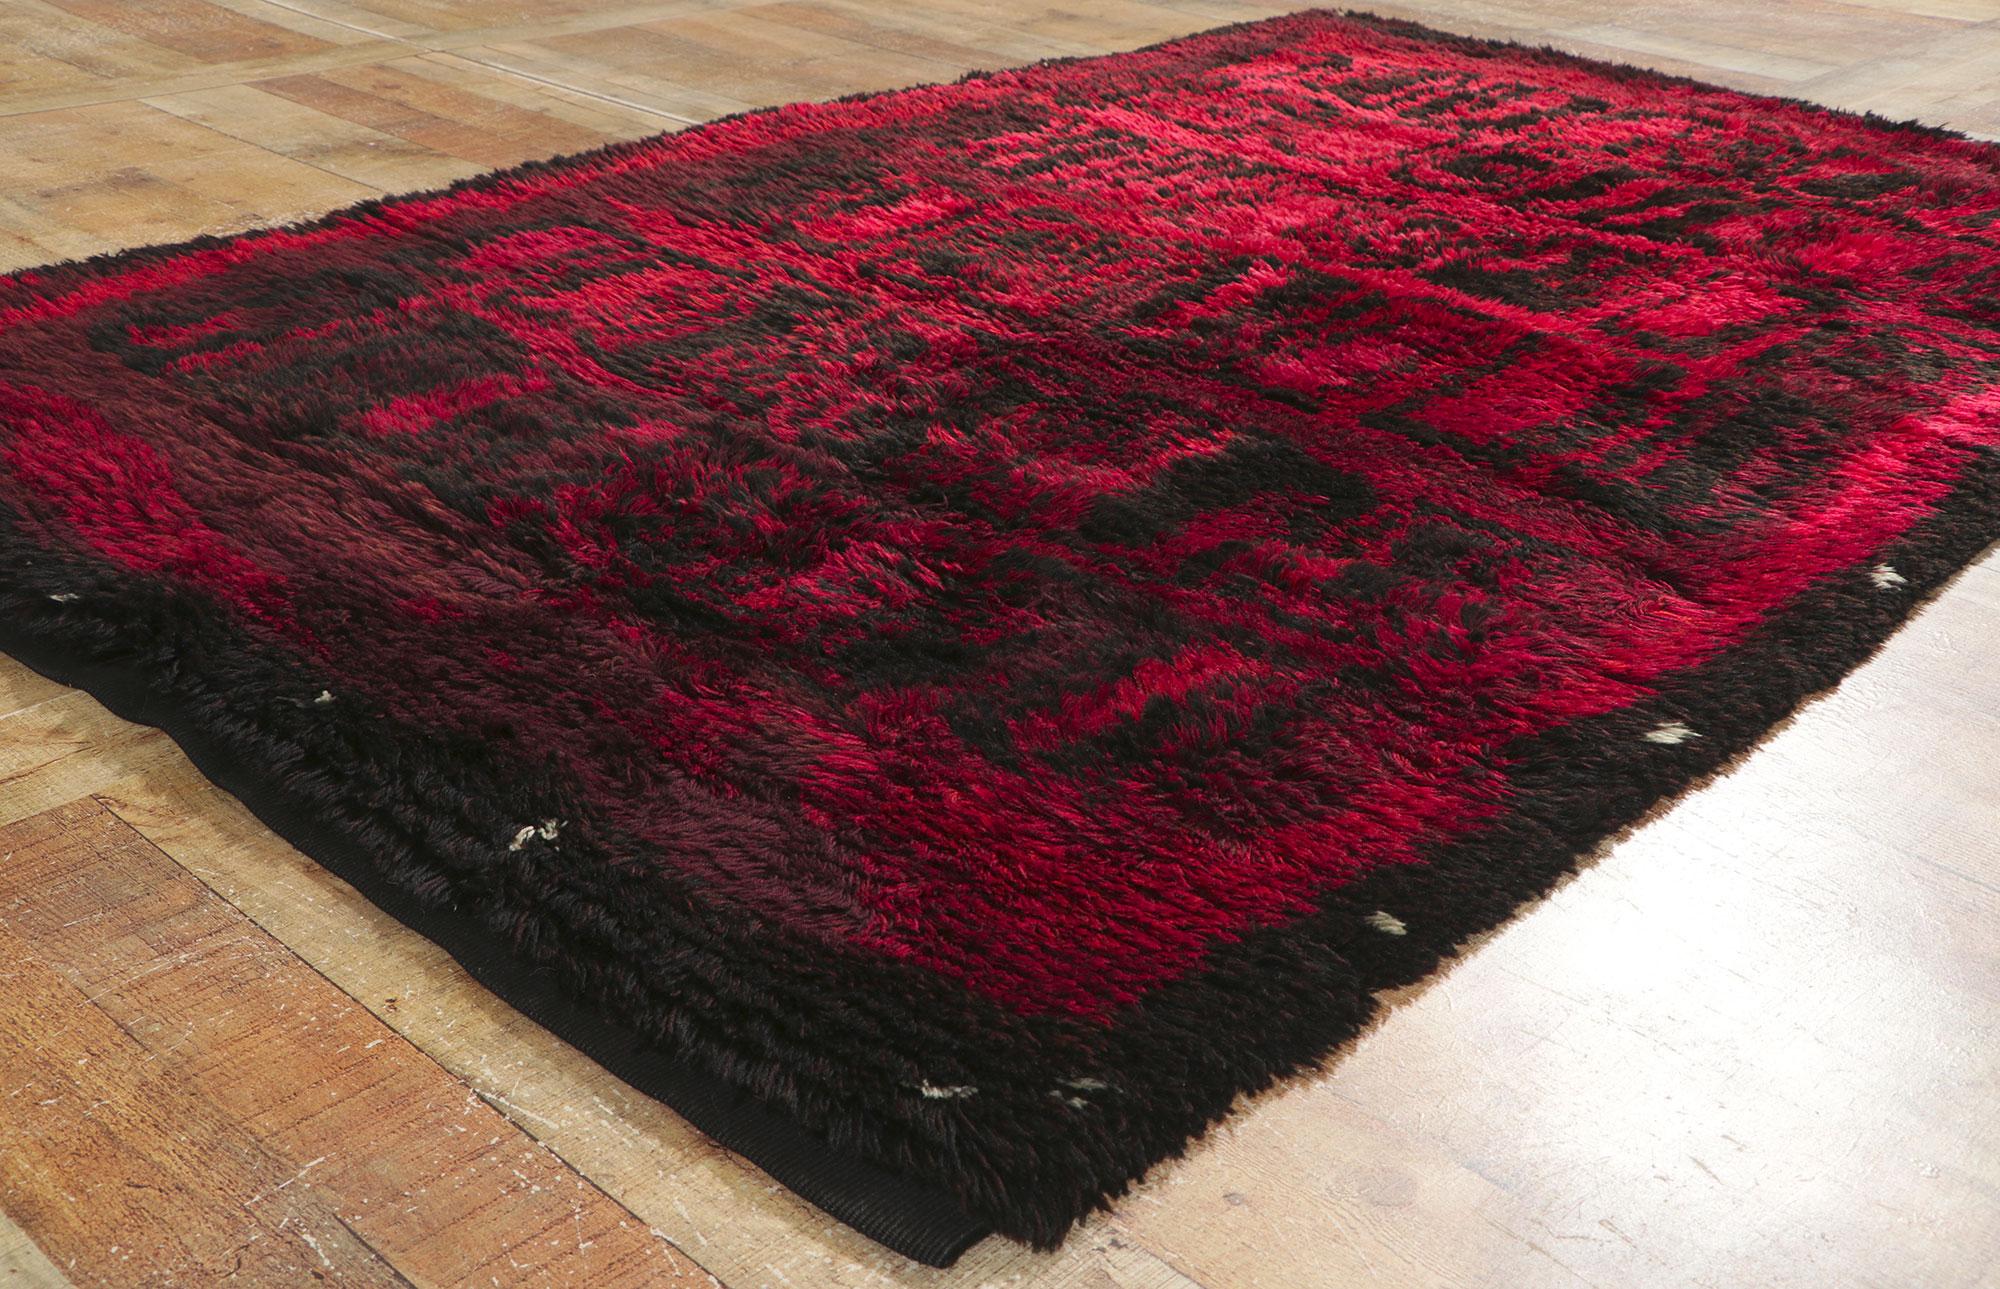 20th Century Signed 1963 Kirsti Ilvessalo Finnish Ryijy Carpet, Punainen Syksy Red Autumn For Sale